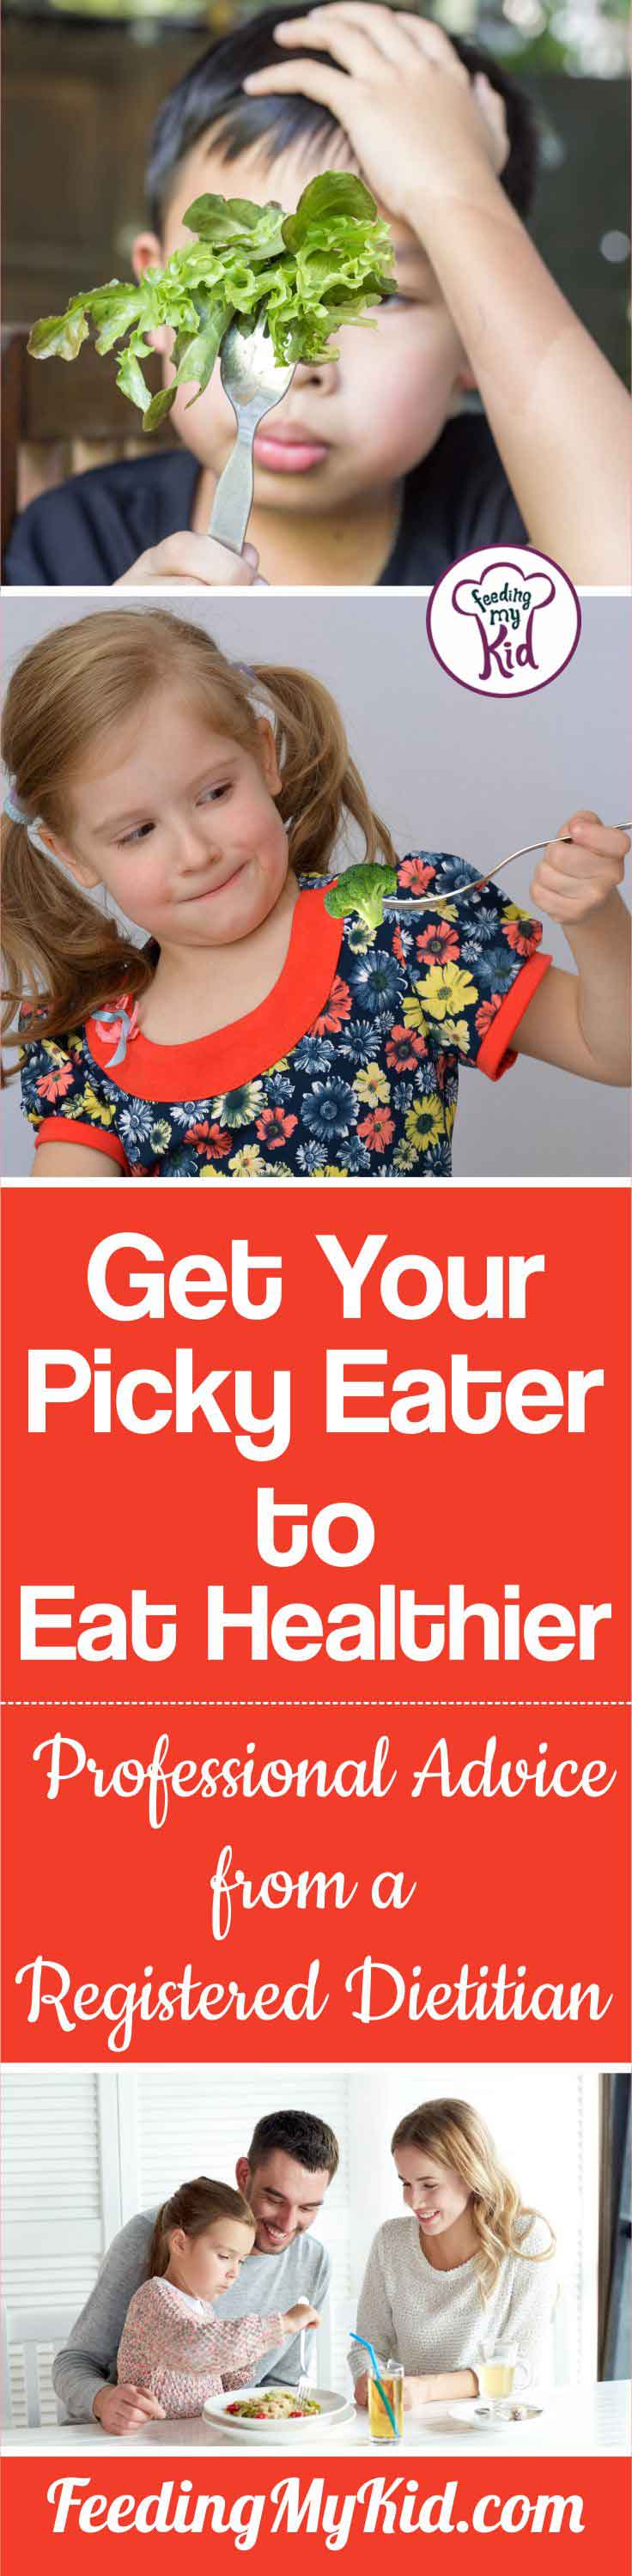 This may not always be possible, but it is advisable that you eat meals together with your picky eater as often as possible.